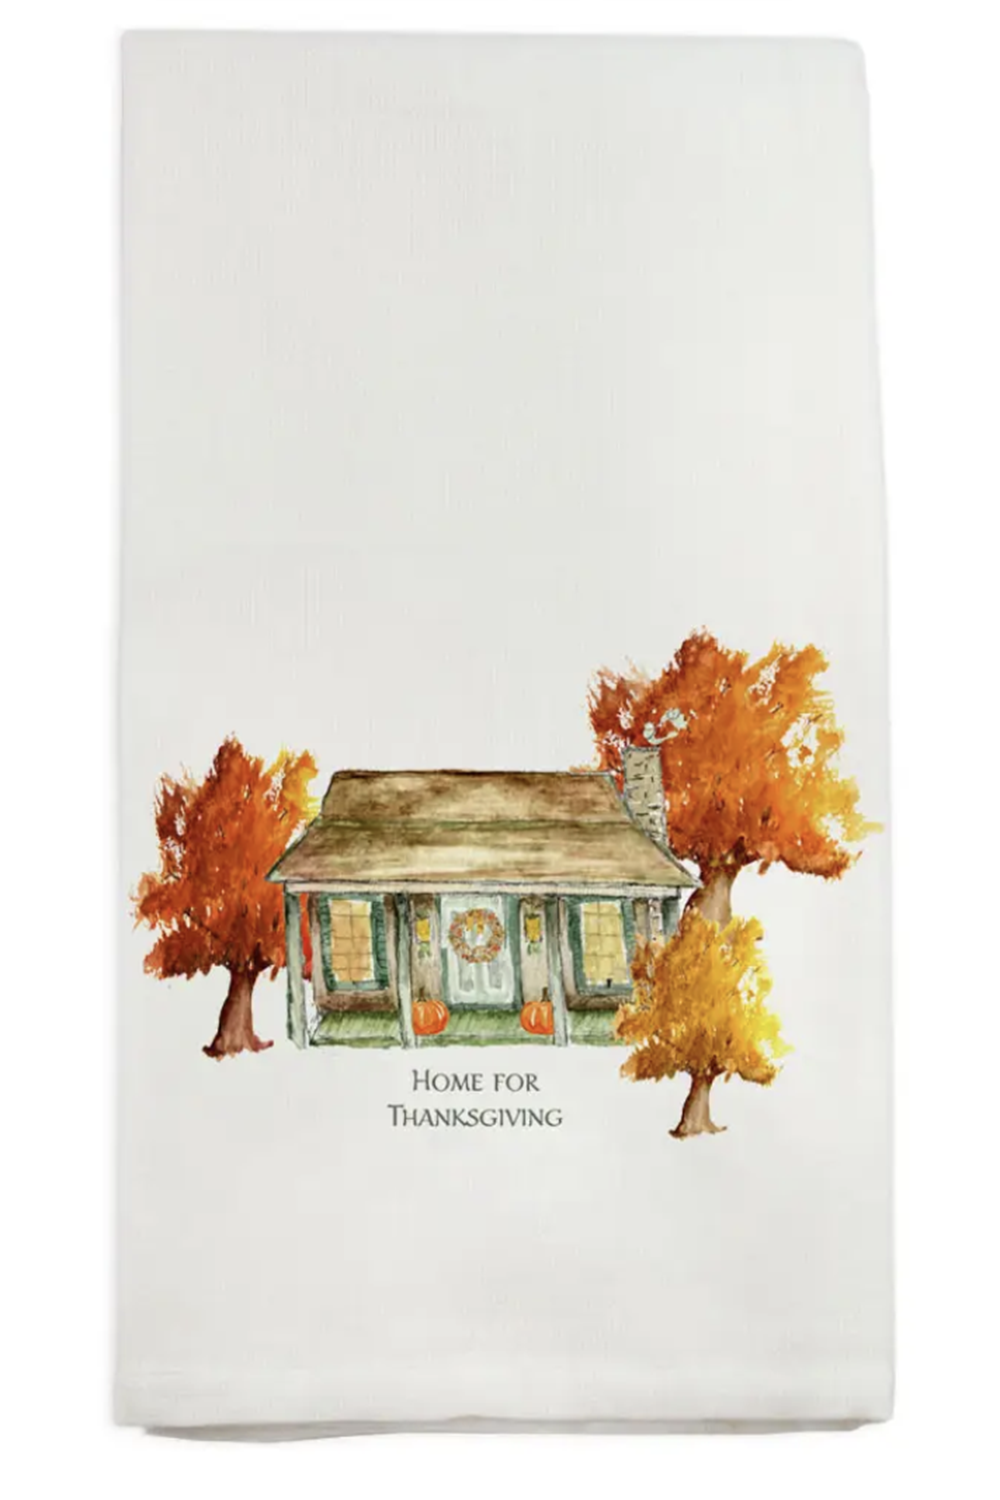 FG Watercolor Tea Towel - Home for Thanksgiving